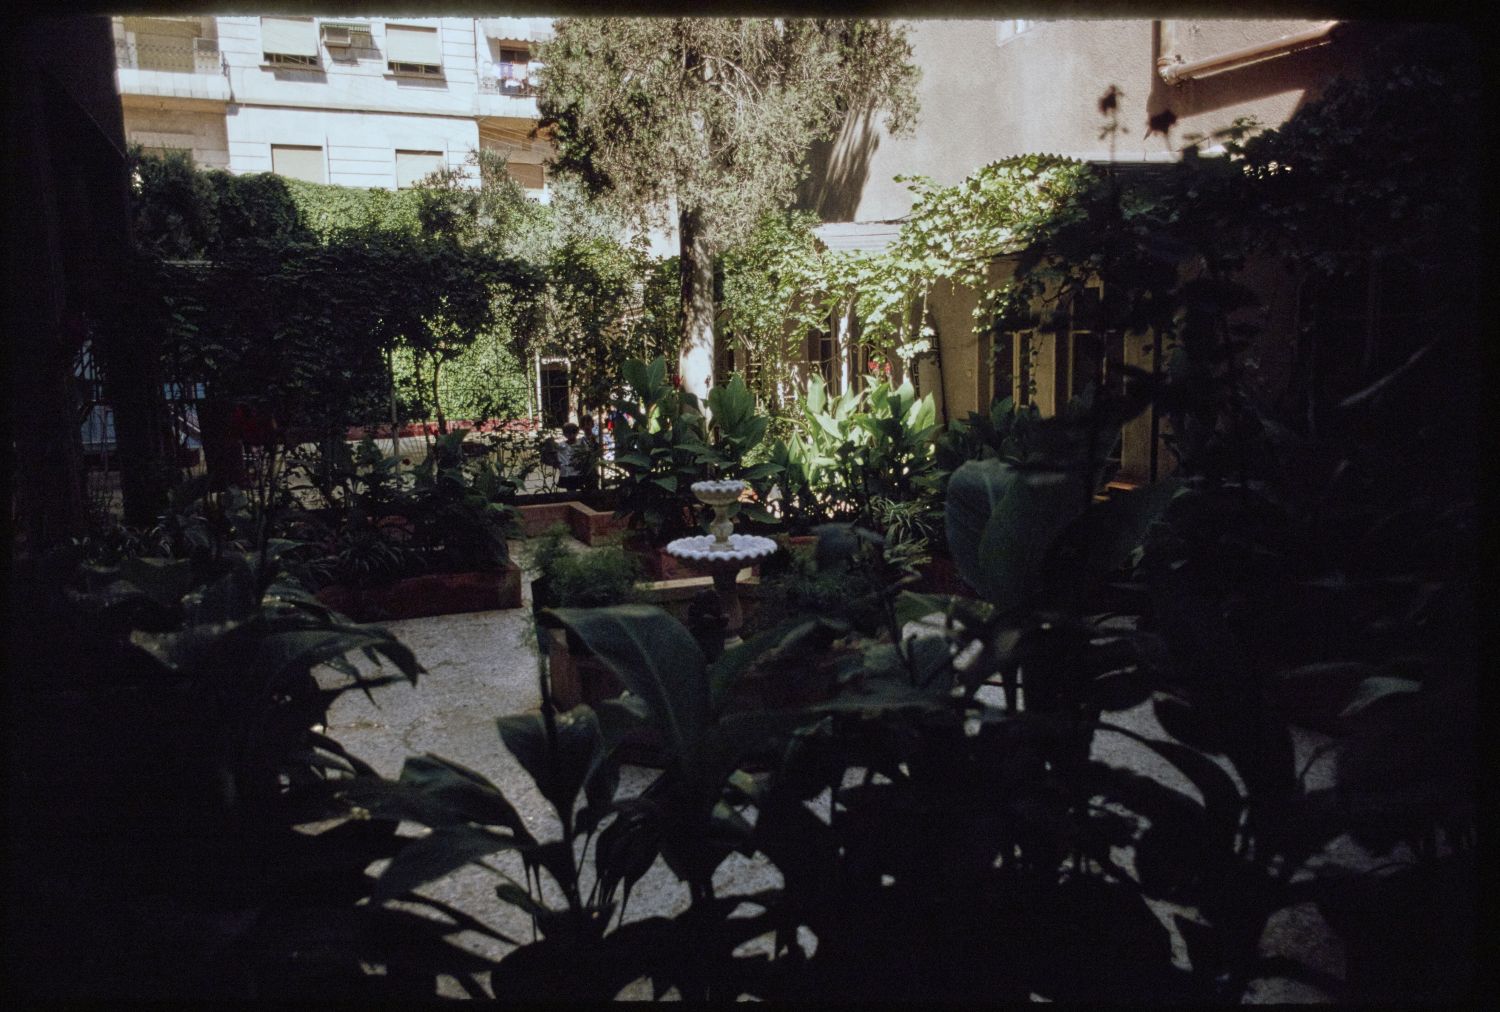 View of courtyard.